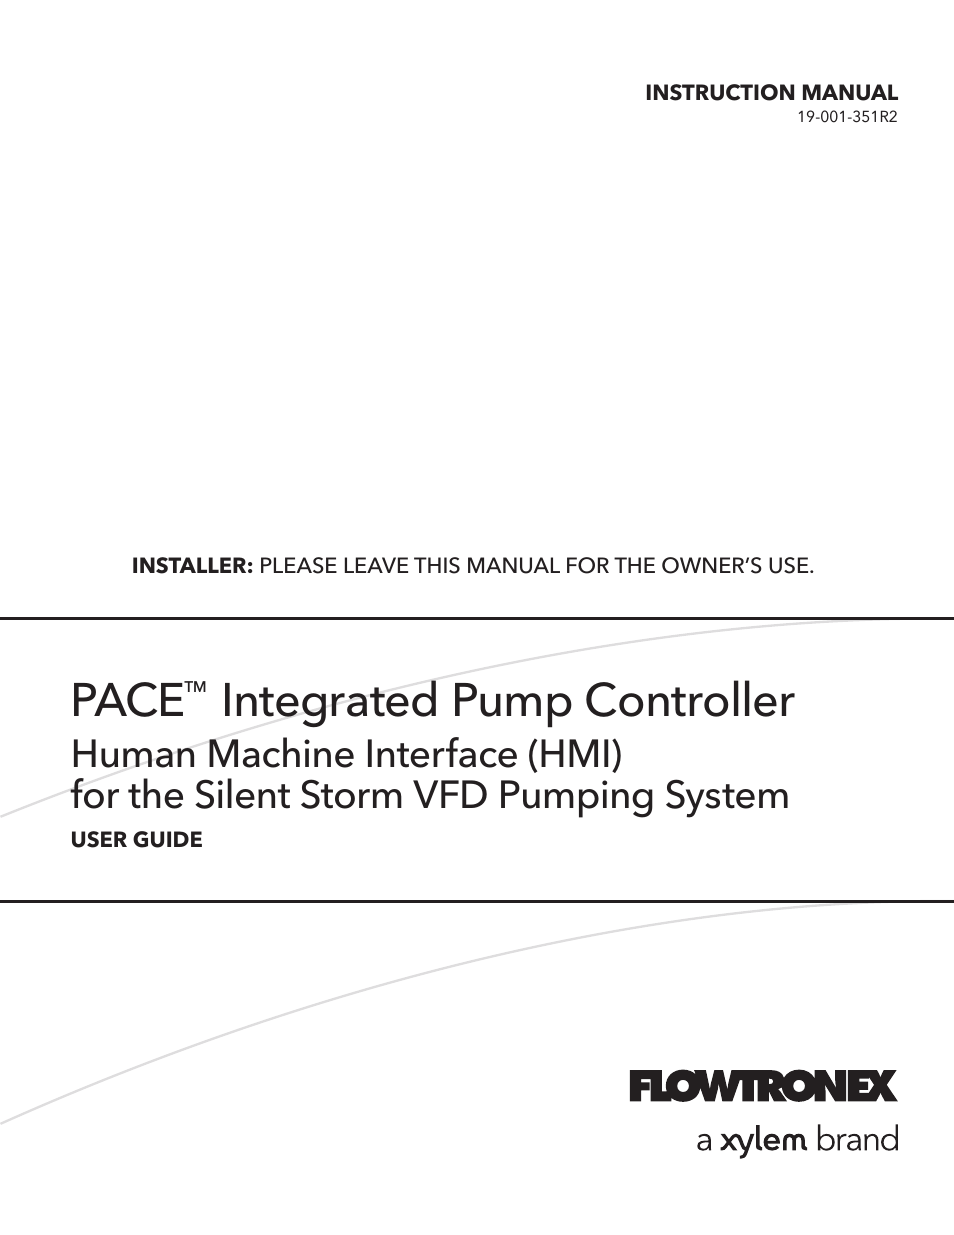 19 001 351R2 PACE Integrated Pump Controller Human Machine Interface (HMI) for the Silent Storm VFD Pumping System – User Guide